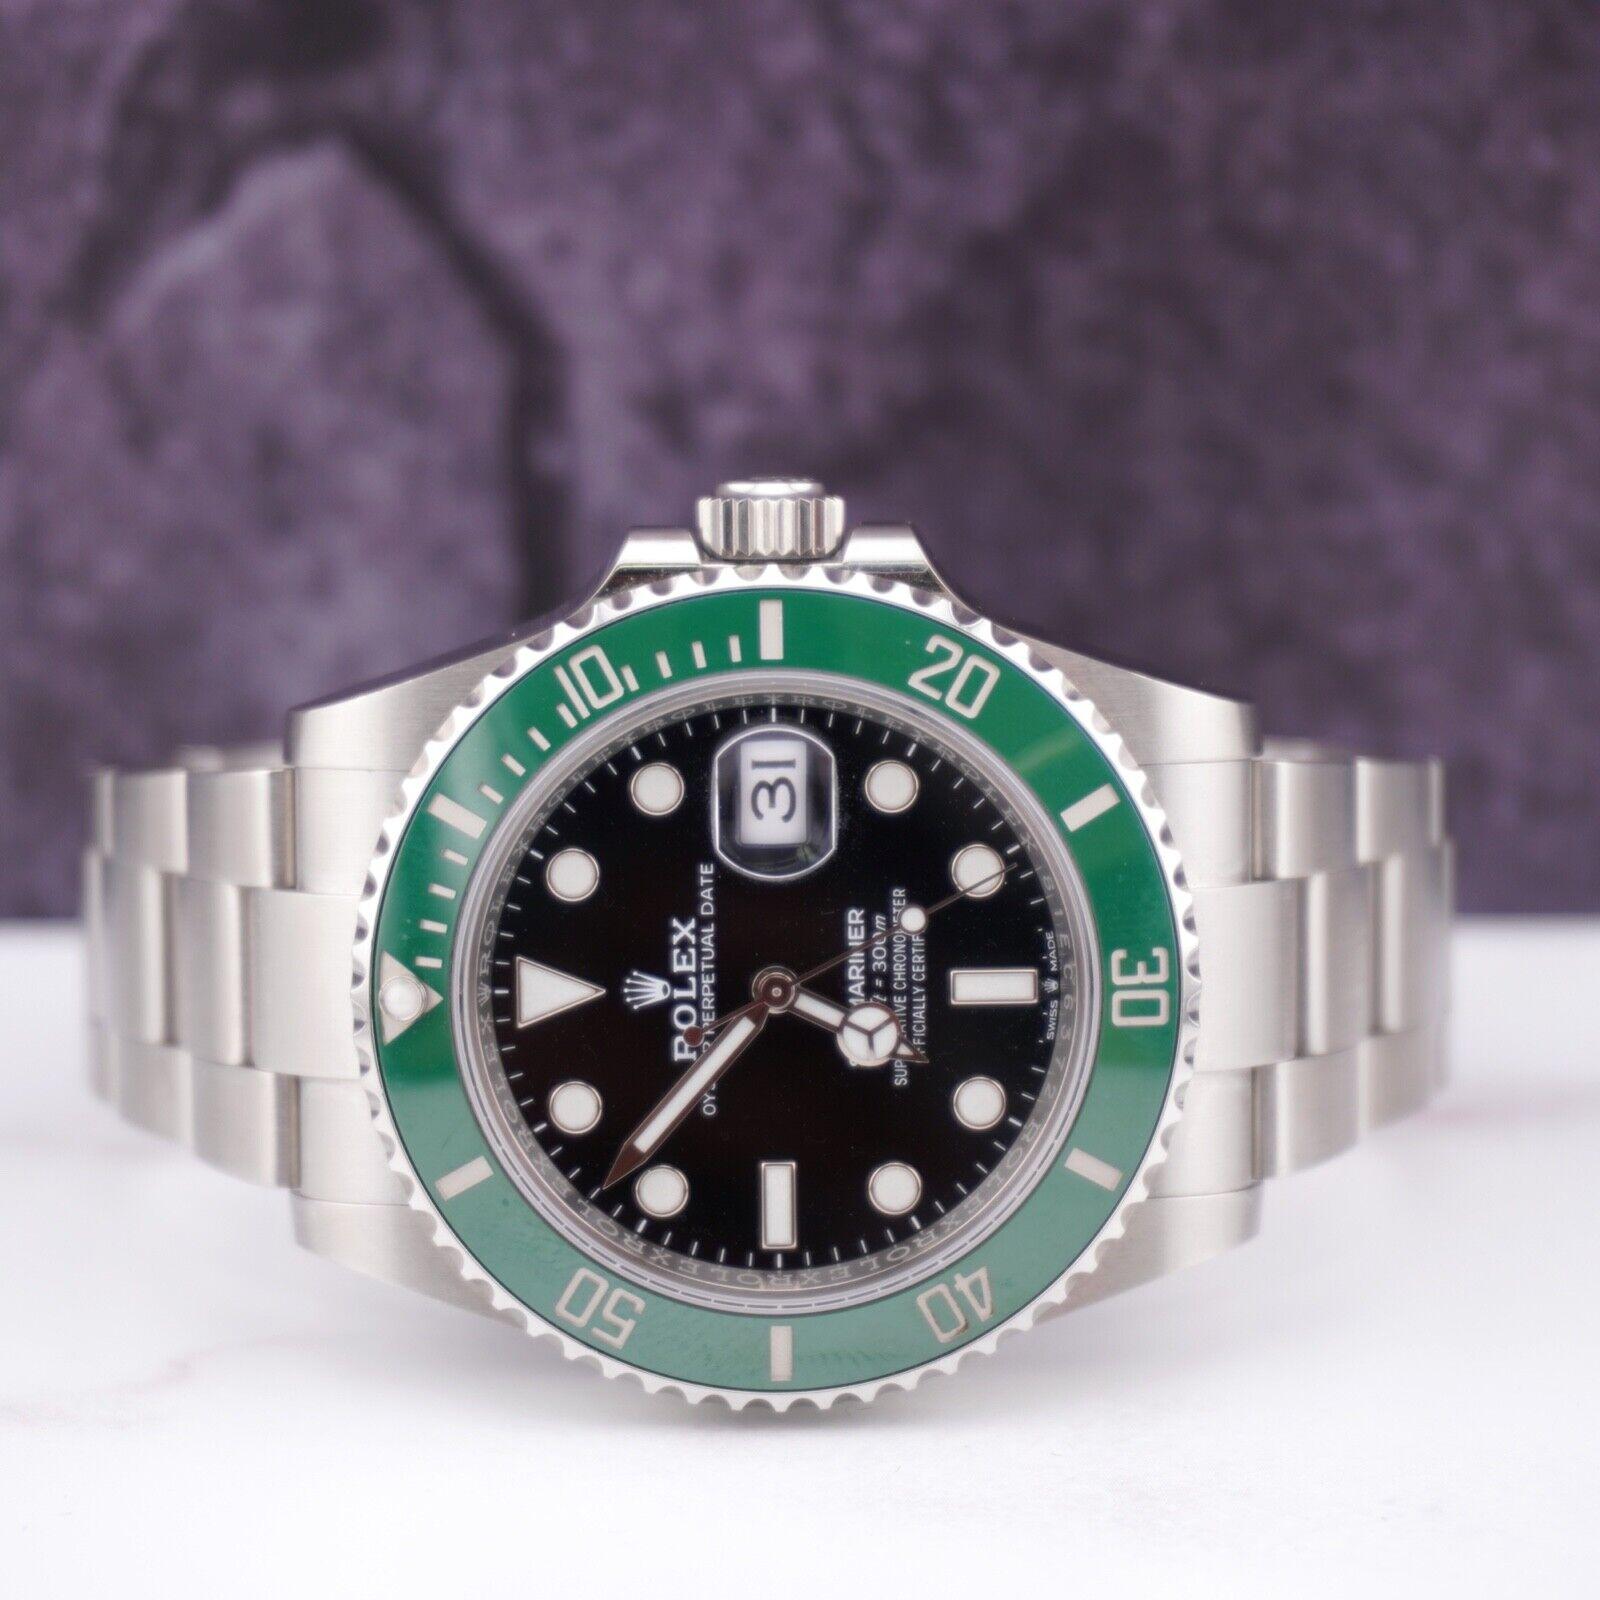 Rolex Submariner Starbucks 40mm Watch. A Pre-owned watch w/ Original Box and 2021 Card. Watch is 100% Authentic and Comes with Authenticity Card. Watch Reference is 126610LV and is in Excellent Condition (See Pictures). The dial color is Black,